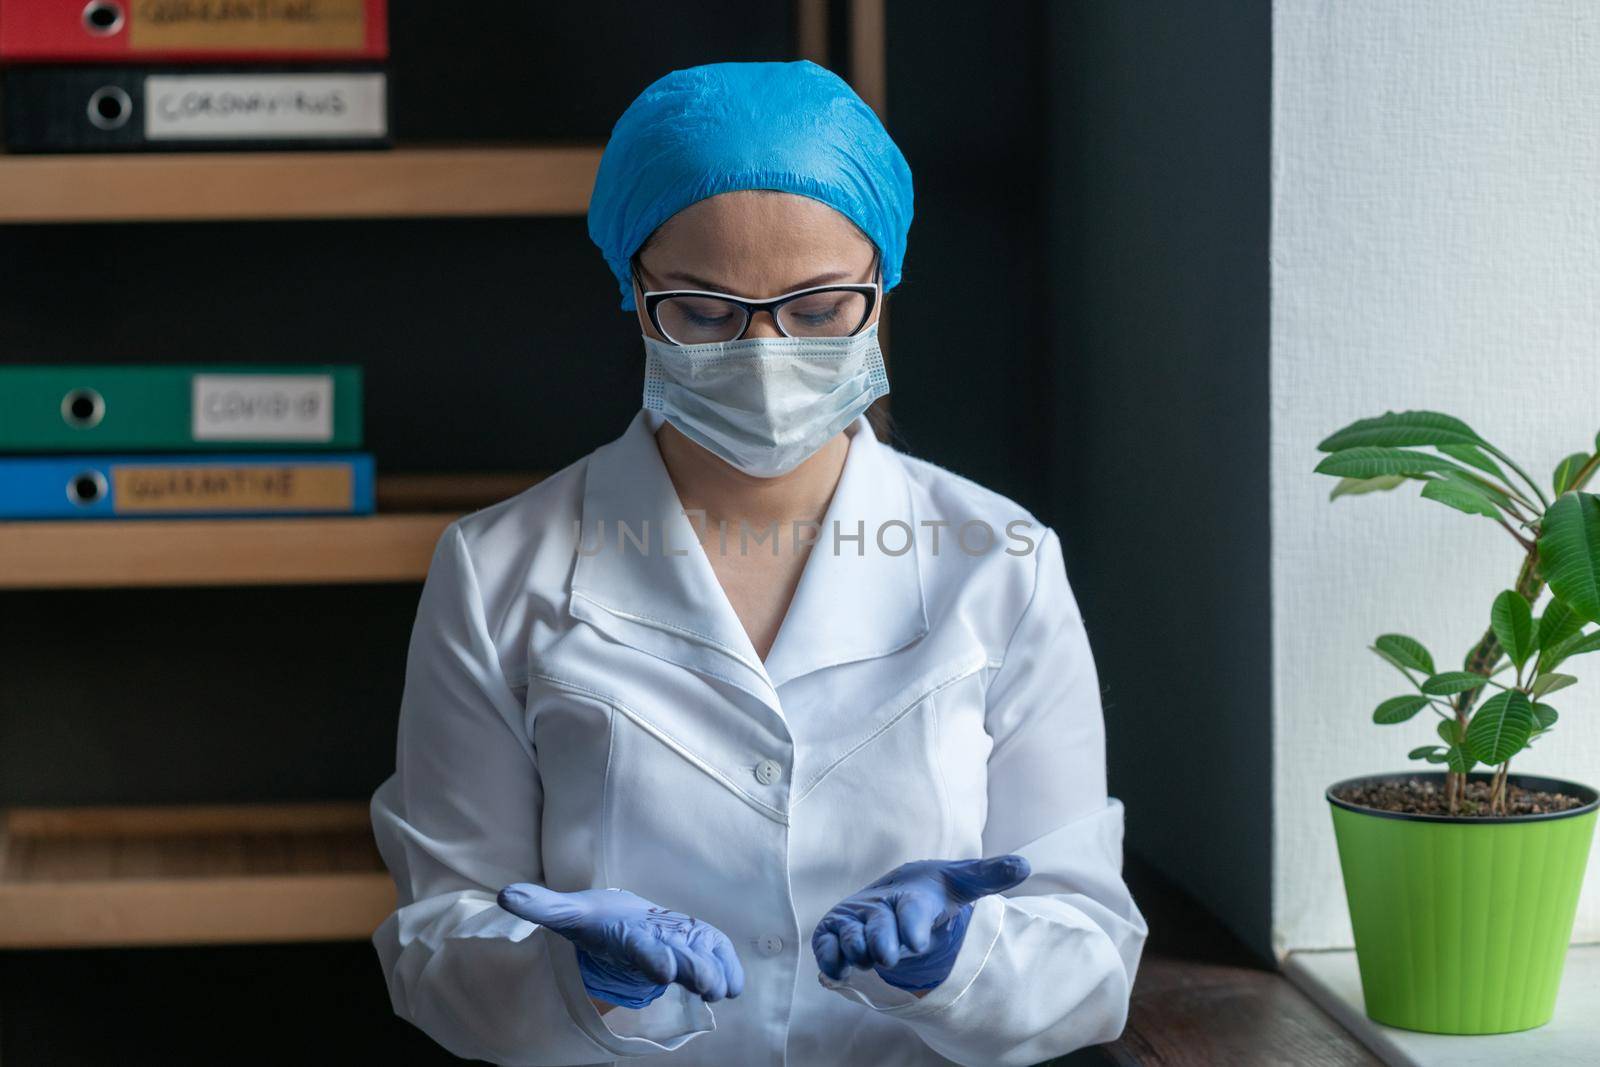 Woman In White Medical Uniform In Protective Mask And Gloves Carefully Researches Her Hands, Young Female Doctor Looks Down At Her Open Palms Through Glasses, Standing On Medical Office Back